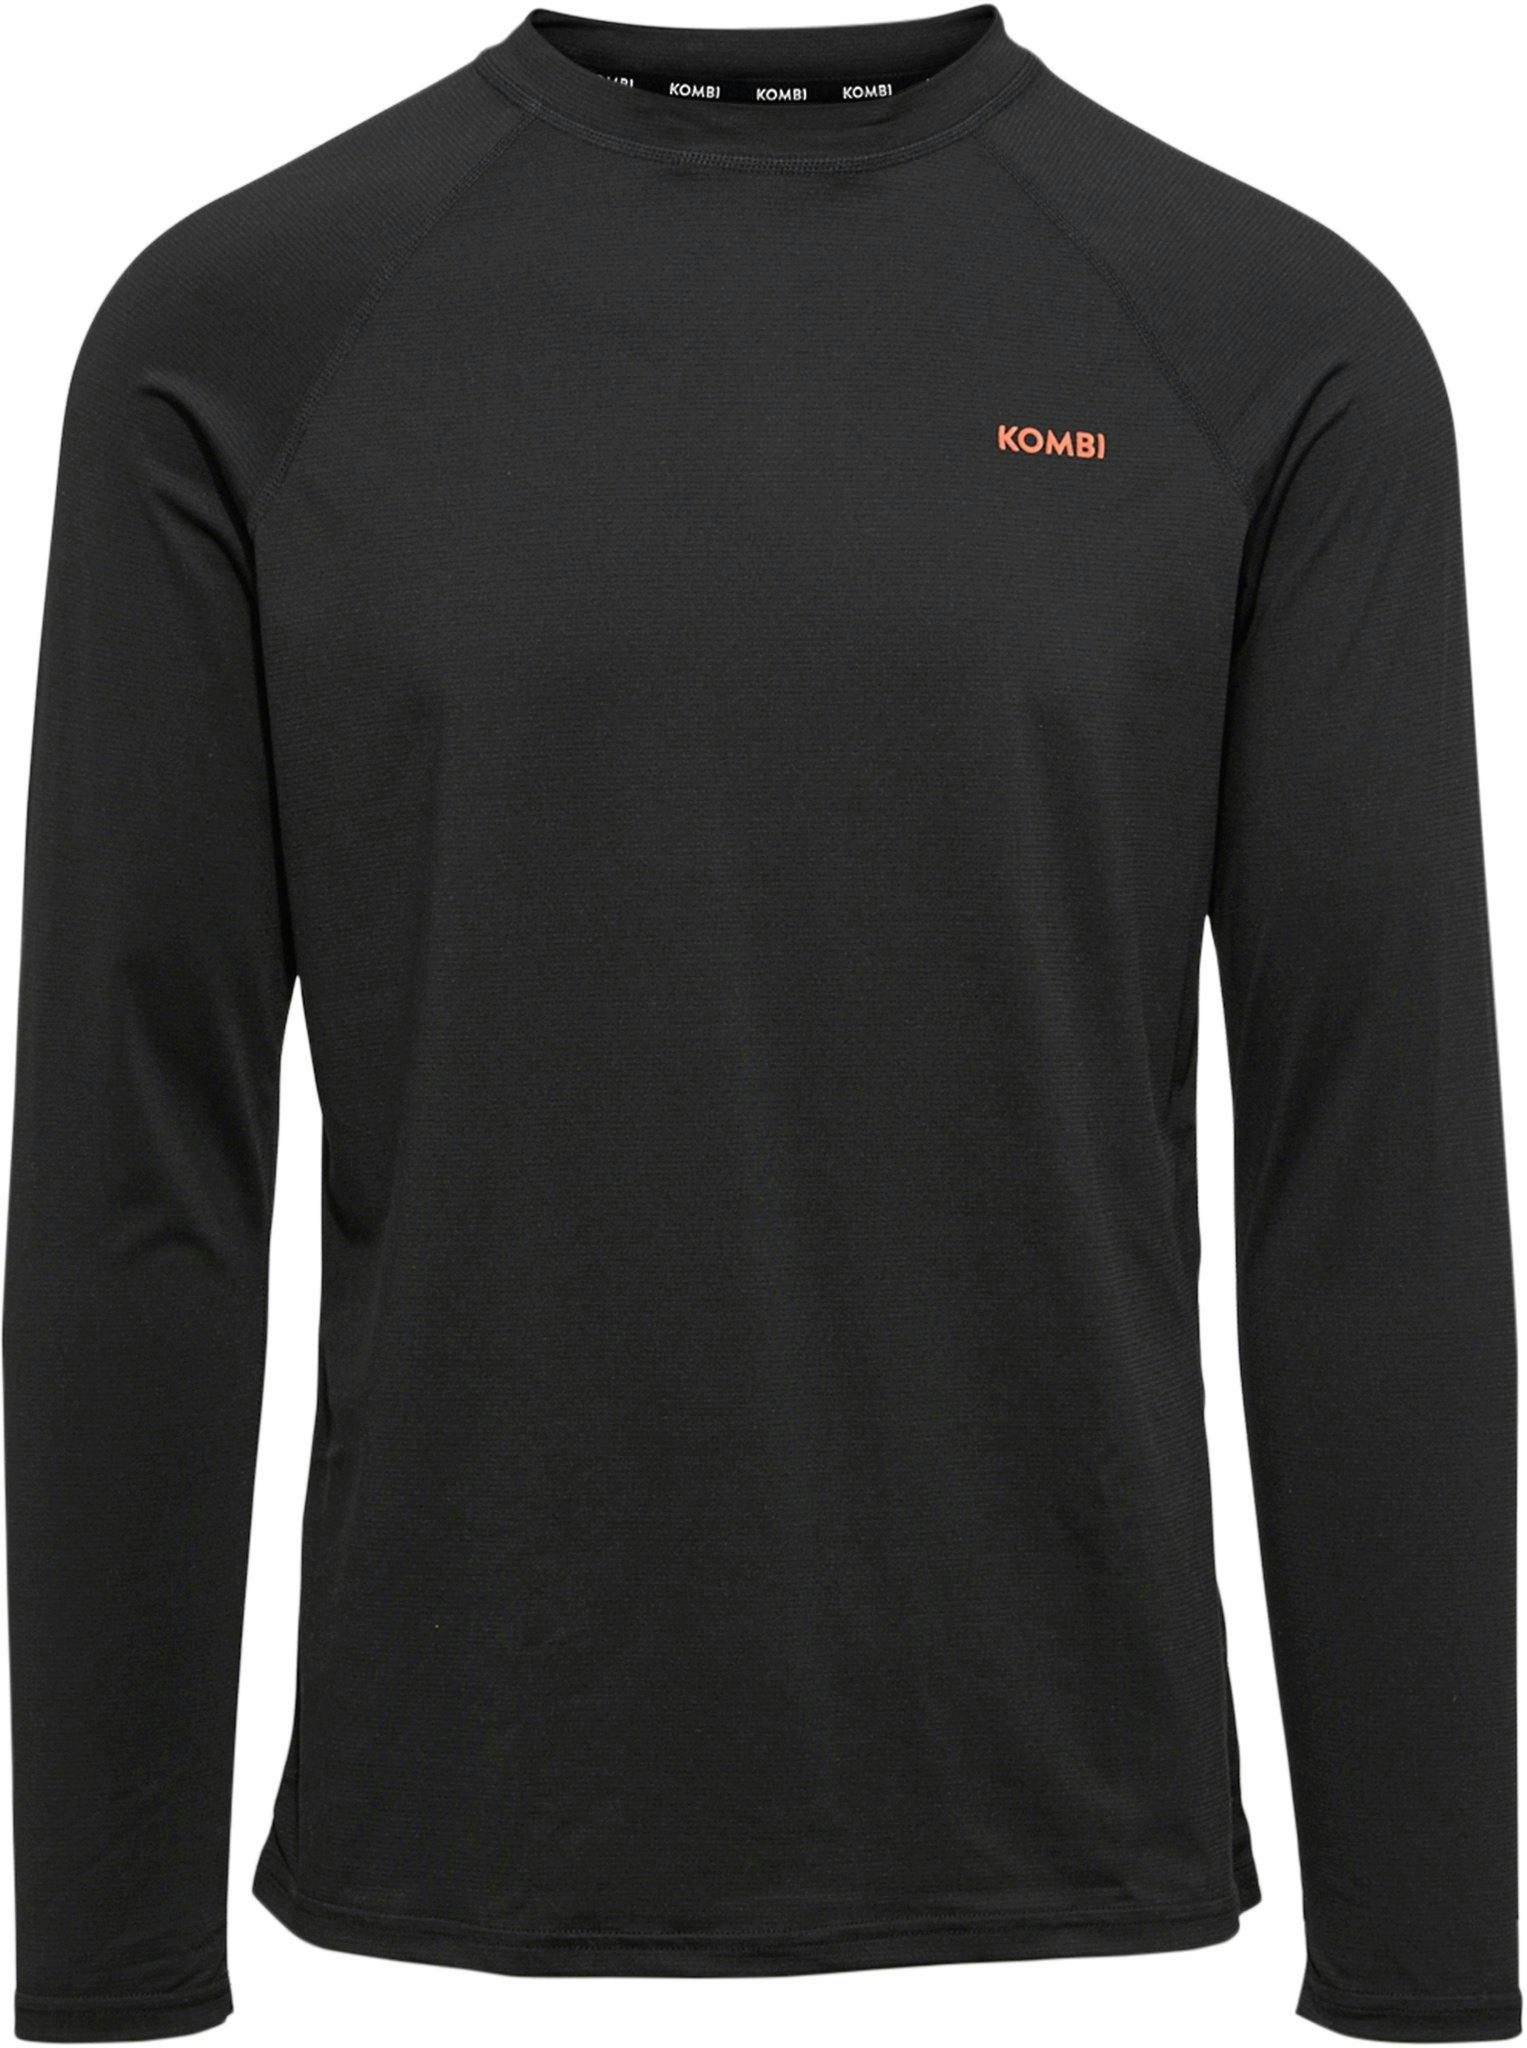 Product image for RH Active Crew Baselayer Top - Men's